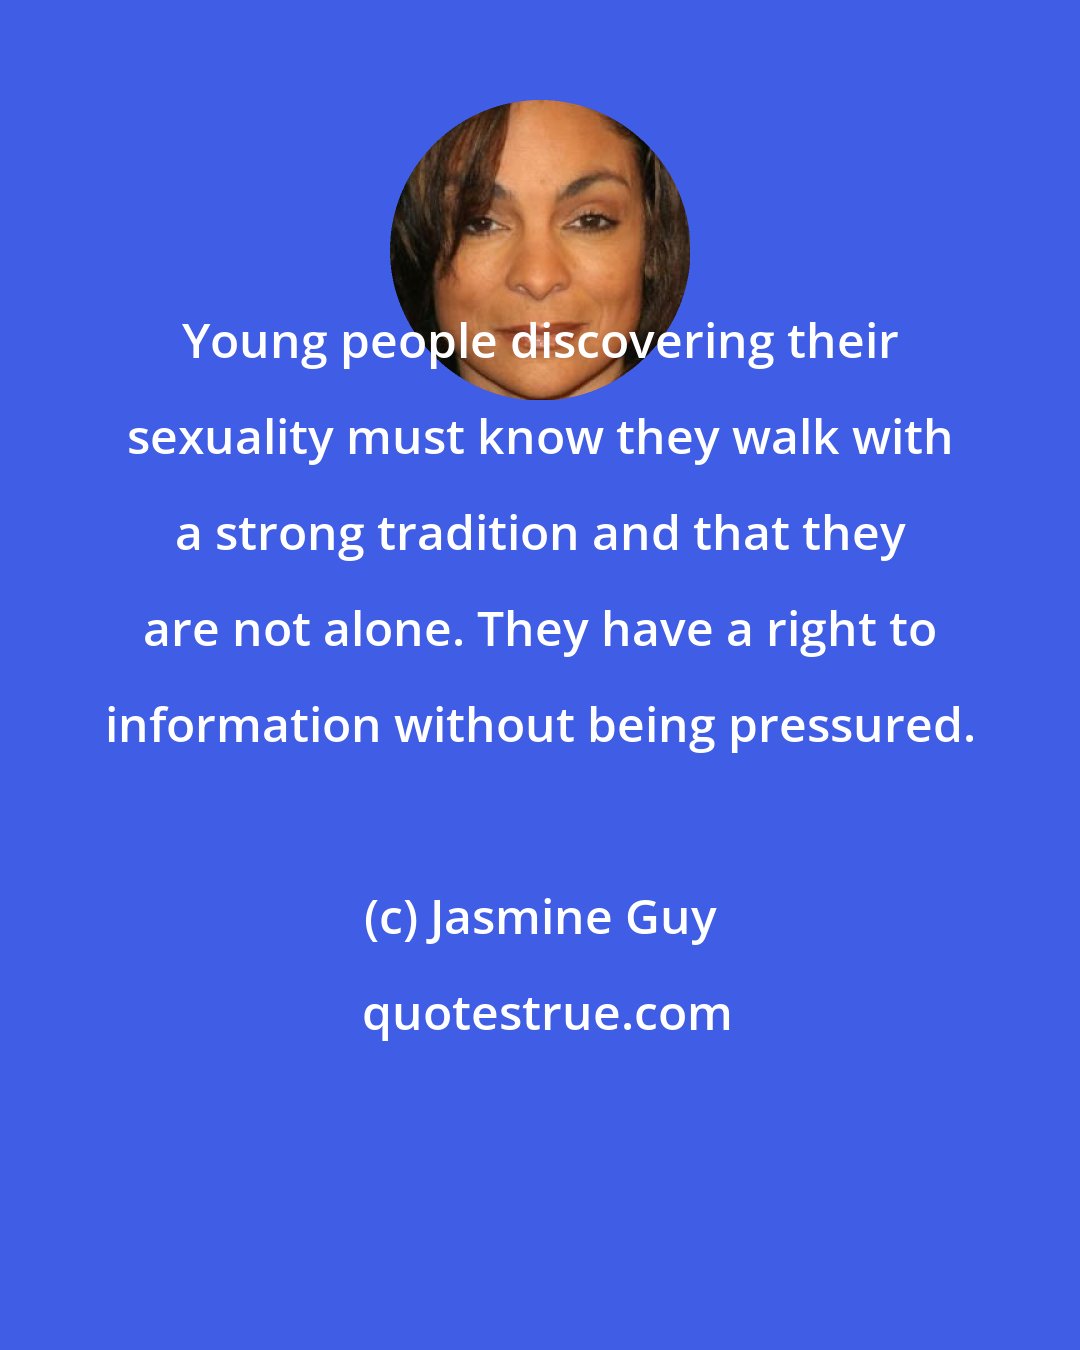 Jasmine Guy: Young people discovering their sexuality must know they walk with a strong tradition and that they are not alone. They have a right to information without being pressured.